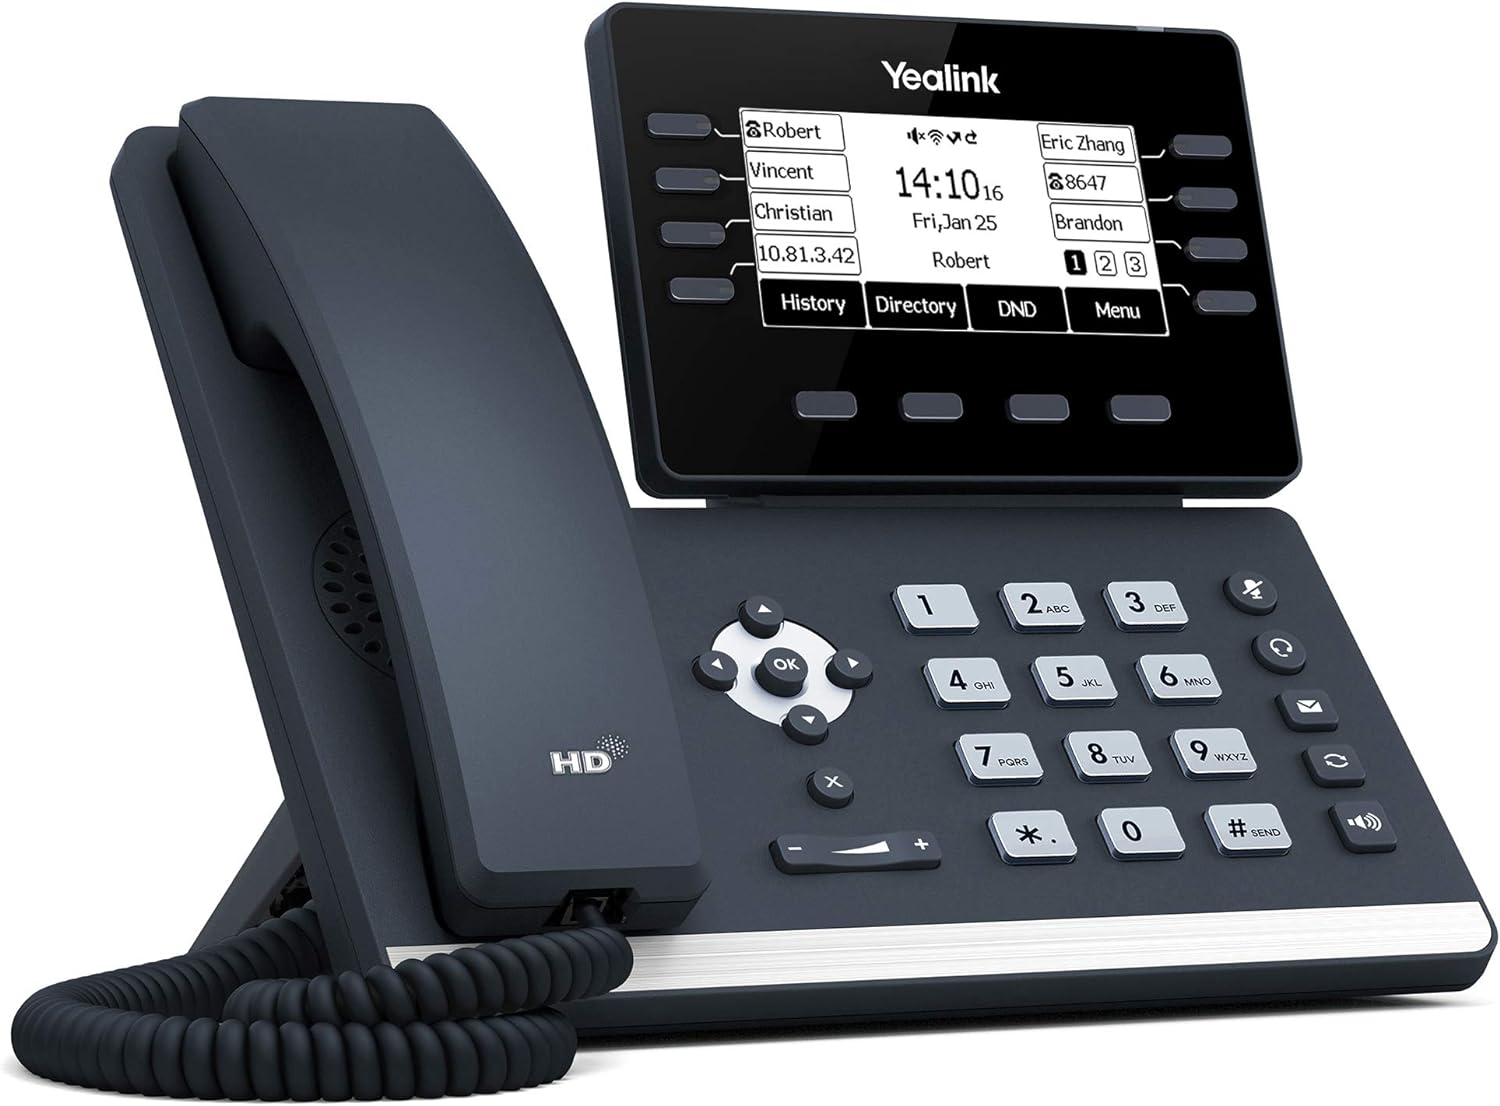 Yealink T53W IP Phone, 12 VoIP Accounts. 3.7-Inch Graphical Display - Black (Certified Refurbished)